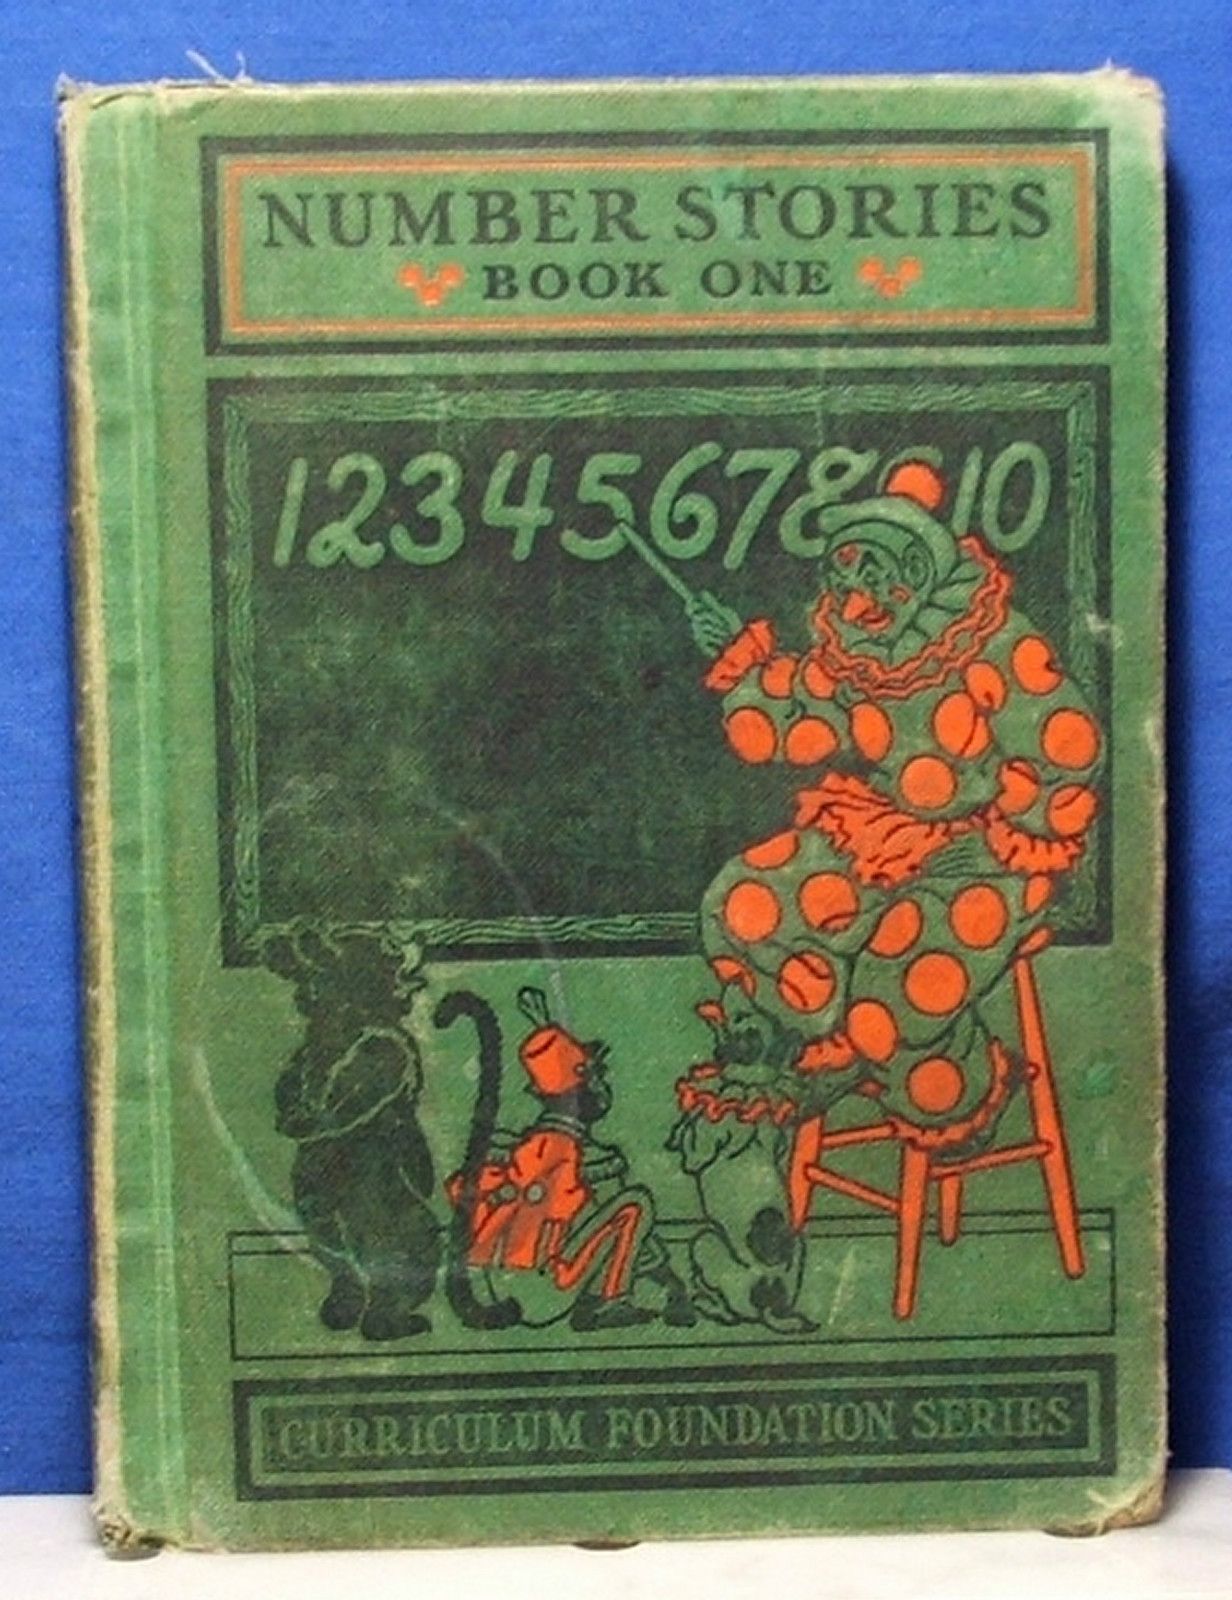 Vintage Childrens Math Book Number Stories Book One 1934